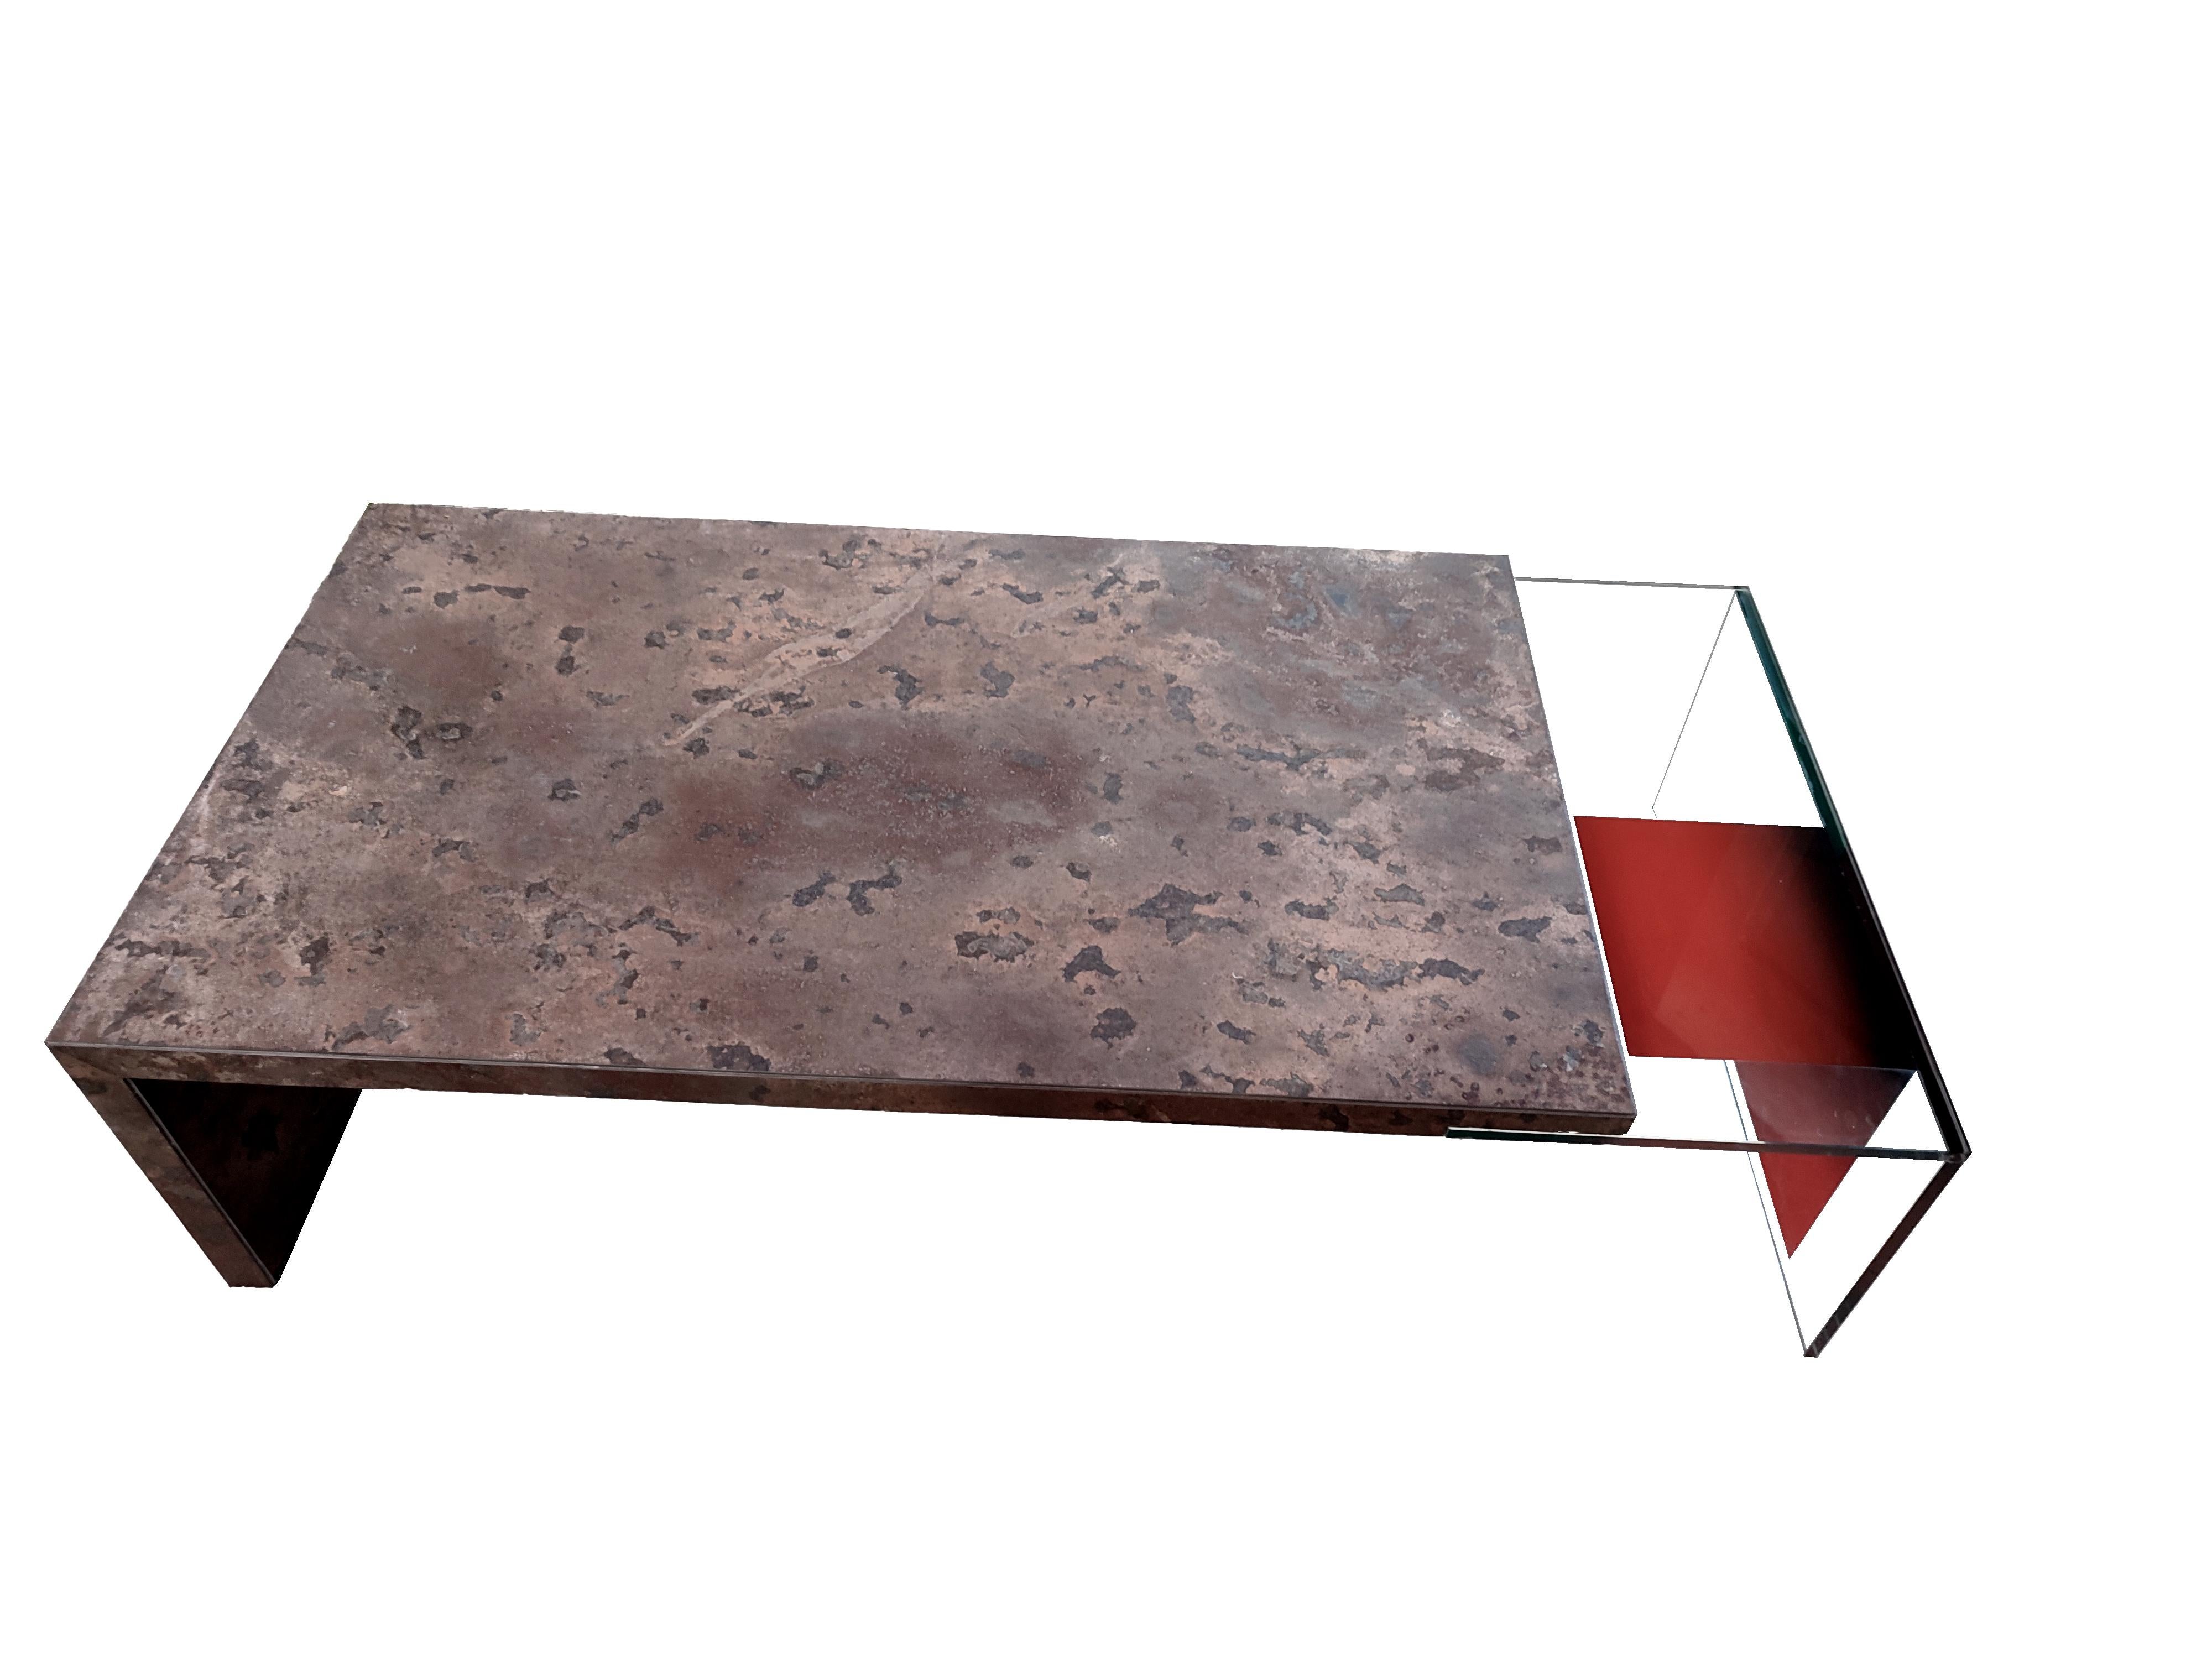 Hand-Crafted Joano Coffee Marble Design Table Unique Piece Contemporary Artist Spain Meddel For Sale